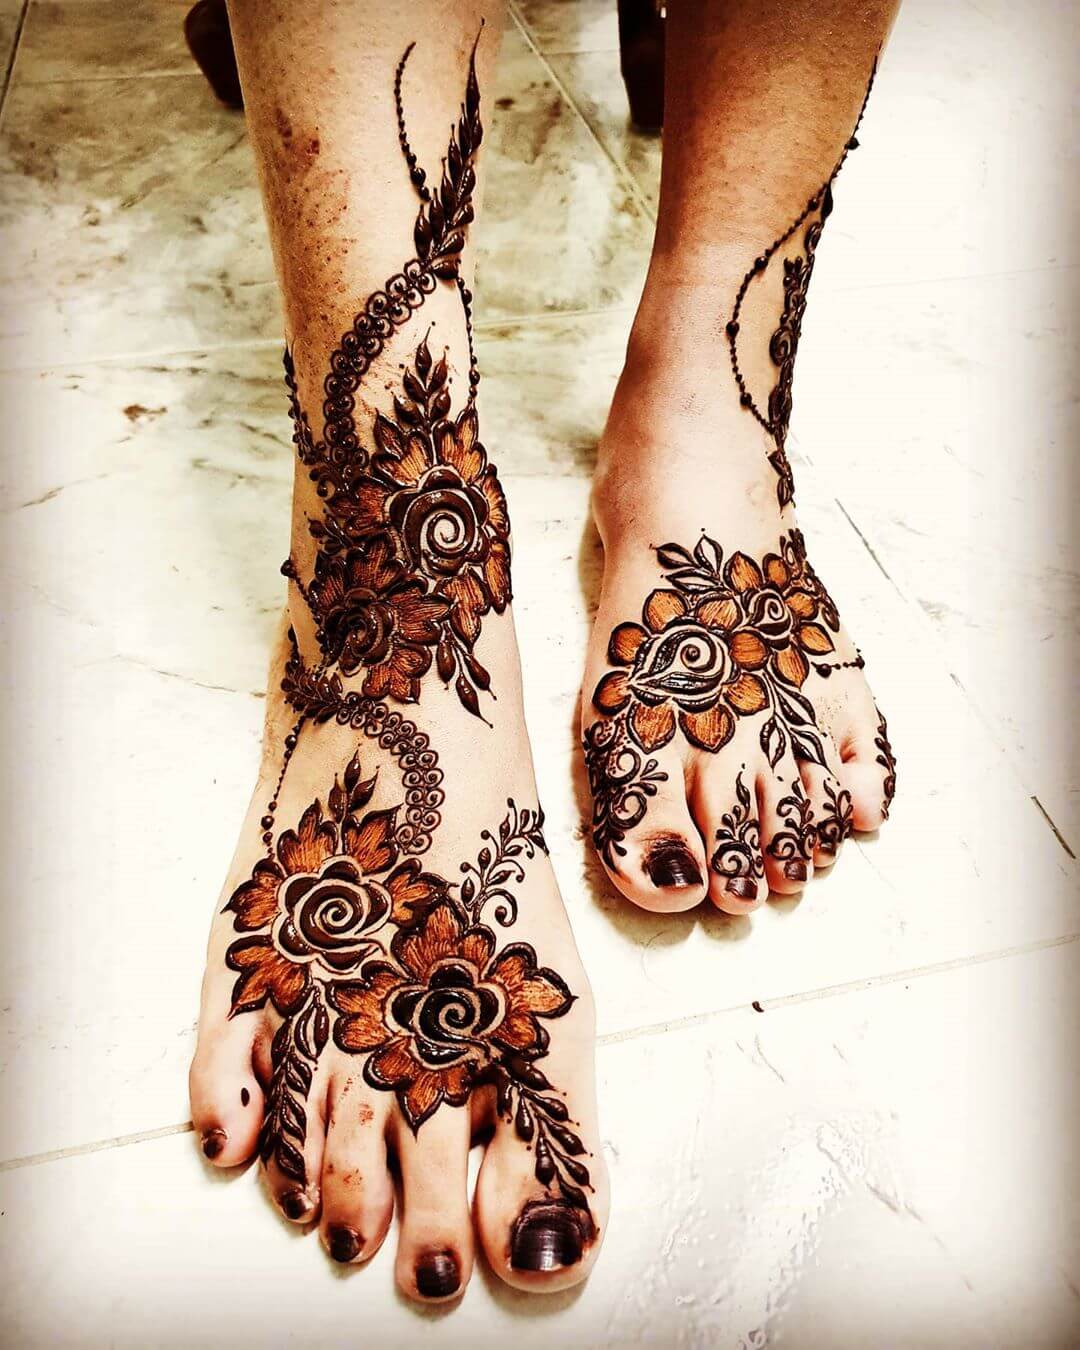 The Roses With Swirls And Spaced-Out Mehendi for Brides Who Love 'Less Is More!